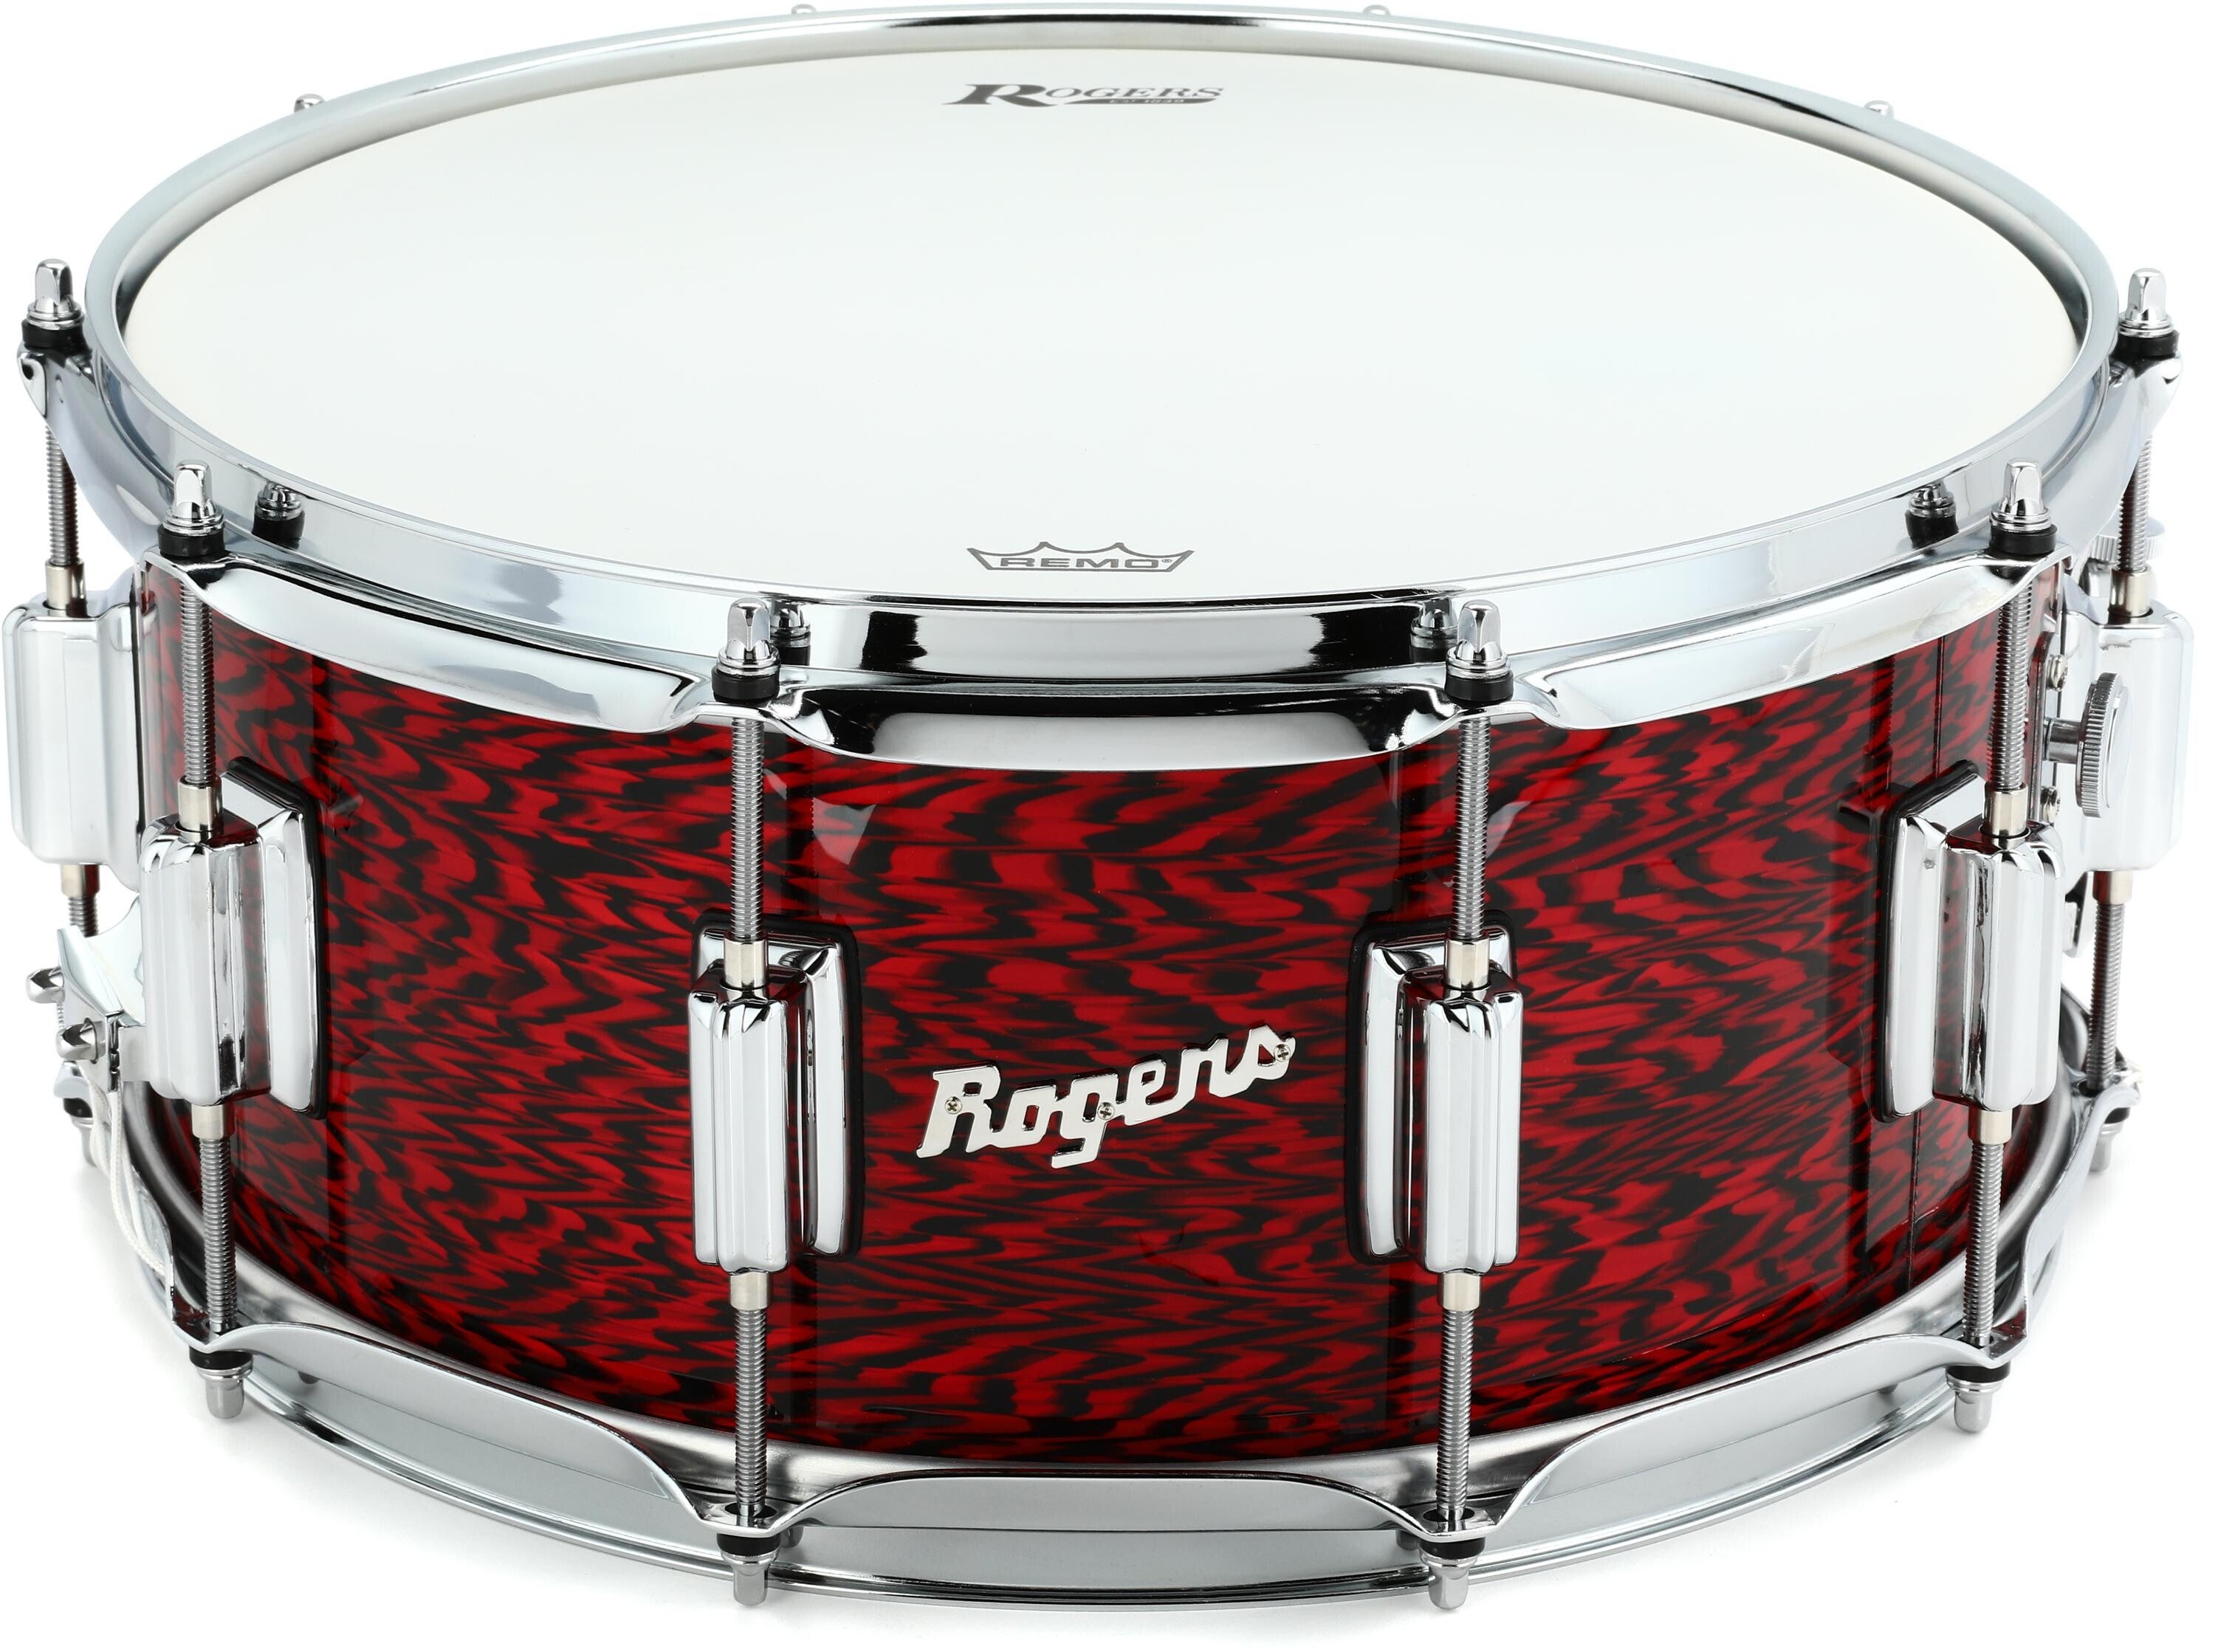 SuperTen Snare Drum - 6.5-inch x 14-inch, Red Onyx - Sweetwater